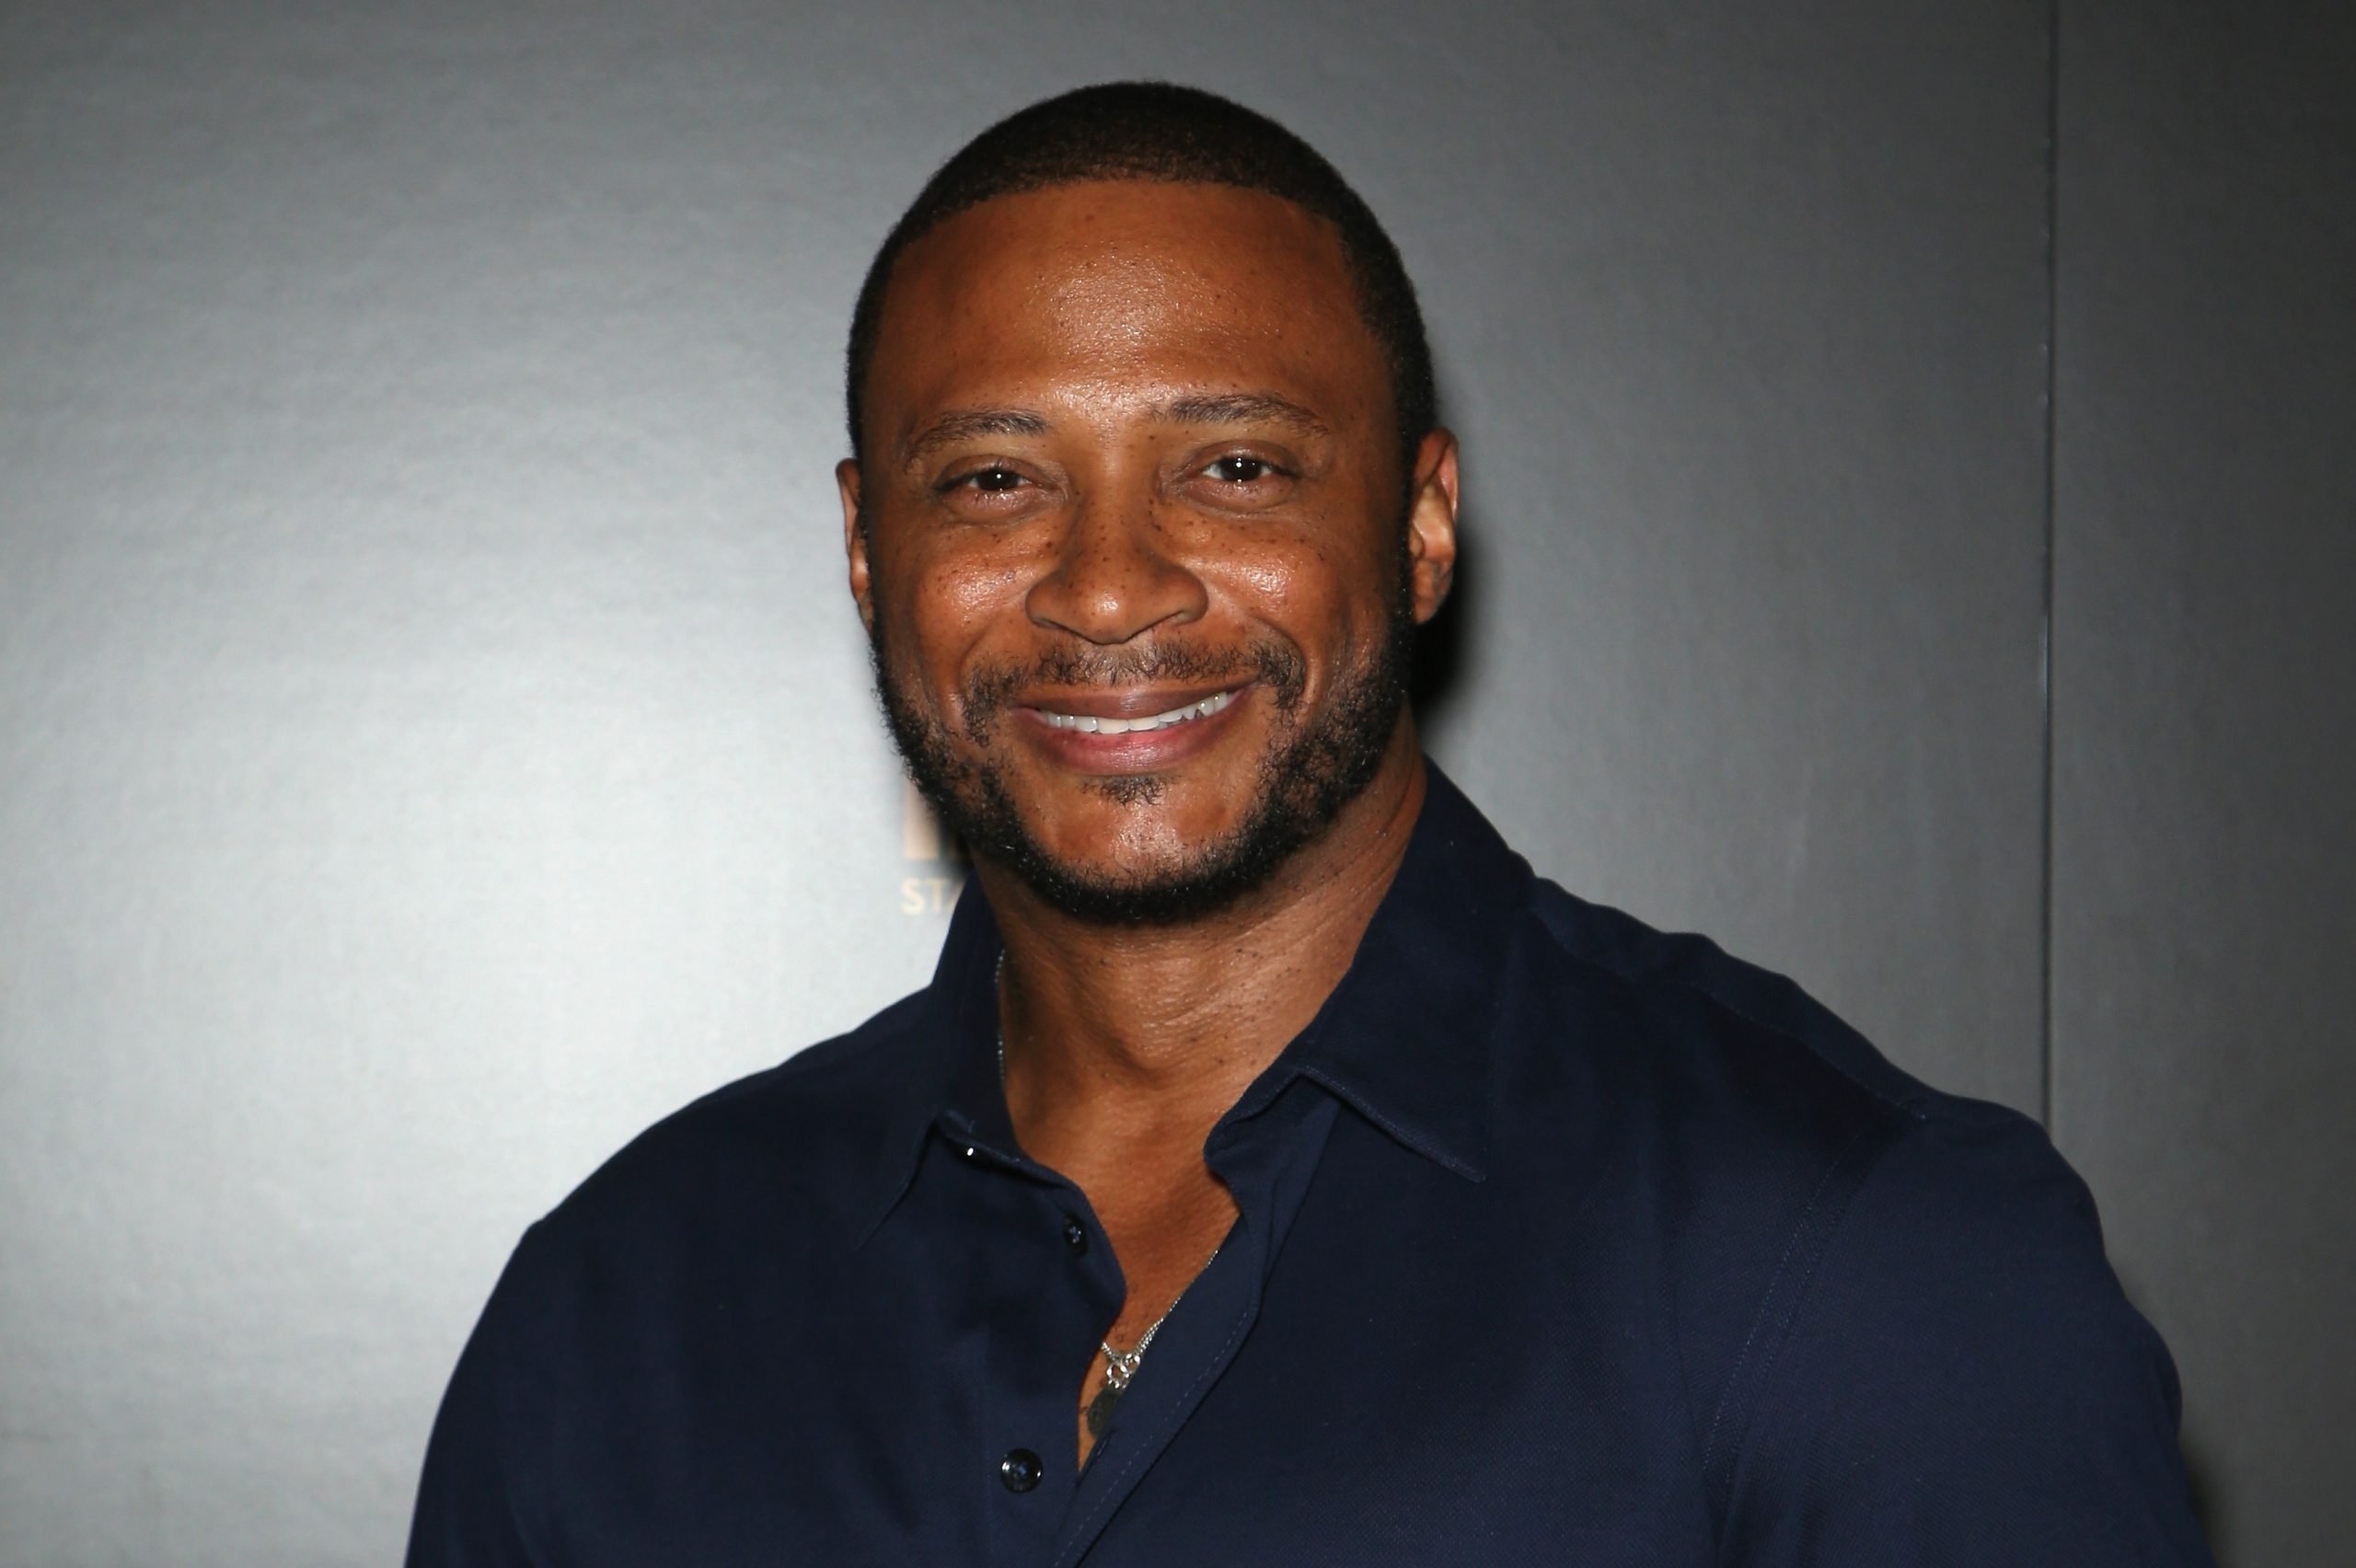 ‘Arrow’ Star David Ramsey Is Set to Reprise His Role as John Diggle in ‘Justice U’ on The CW